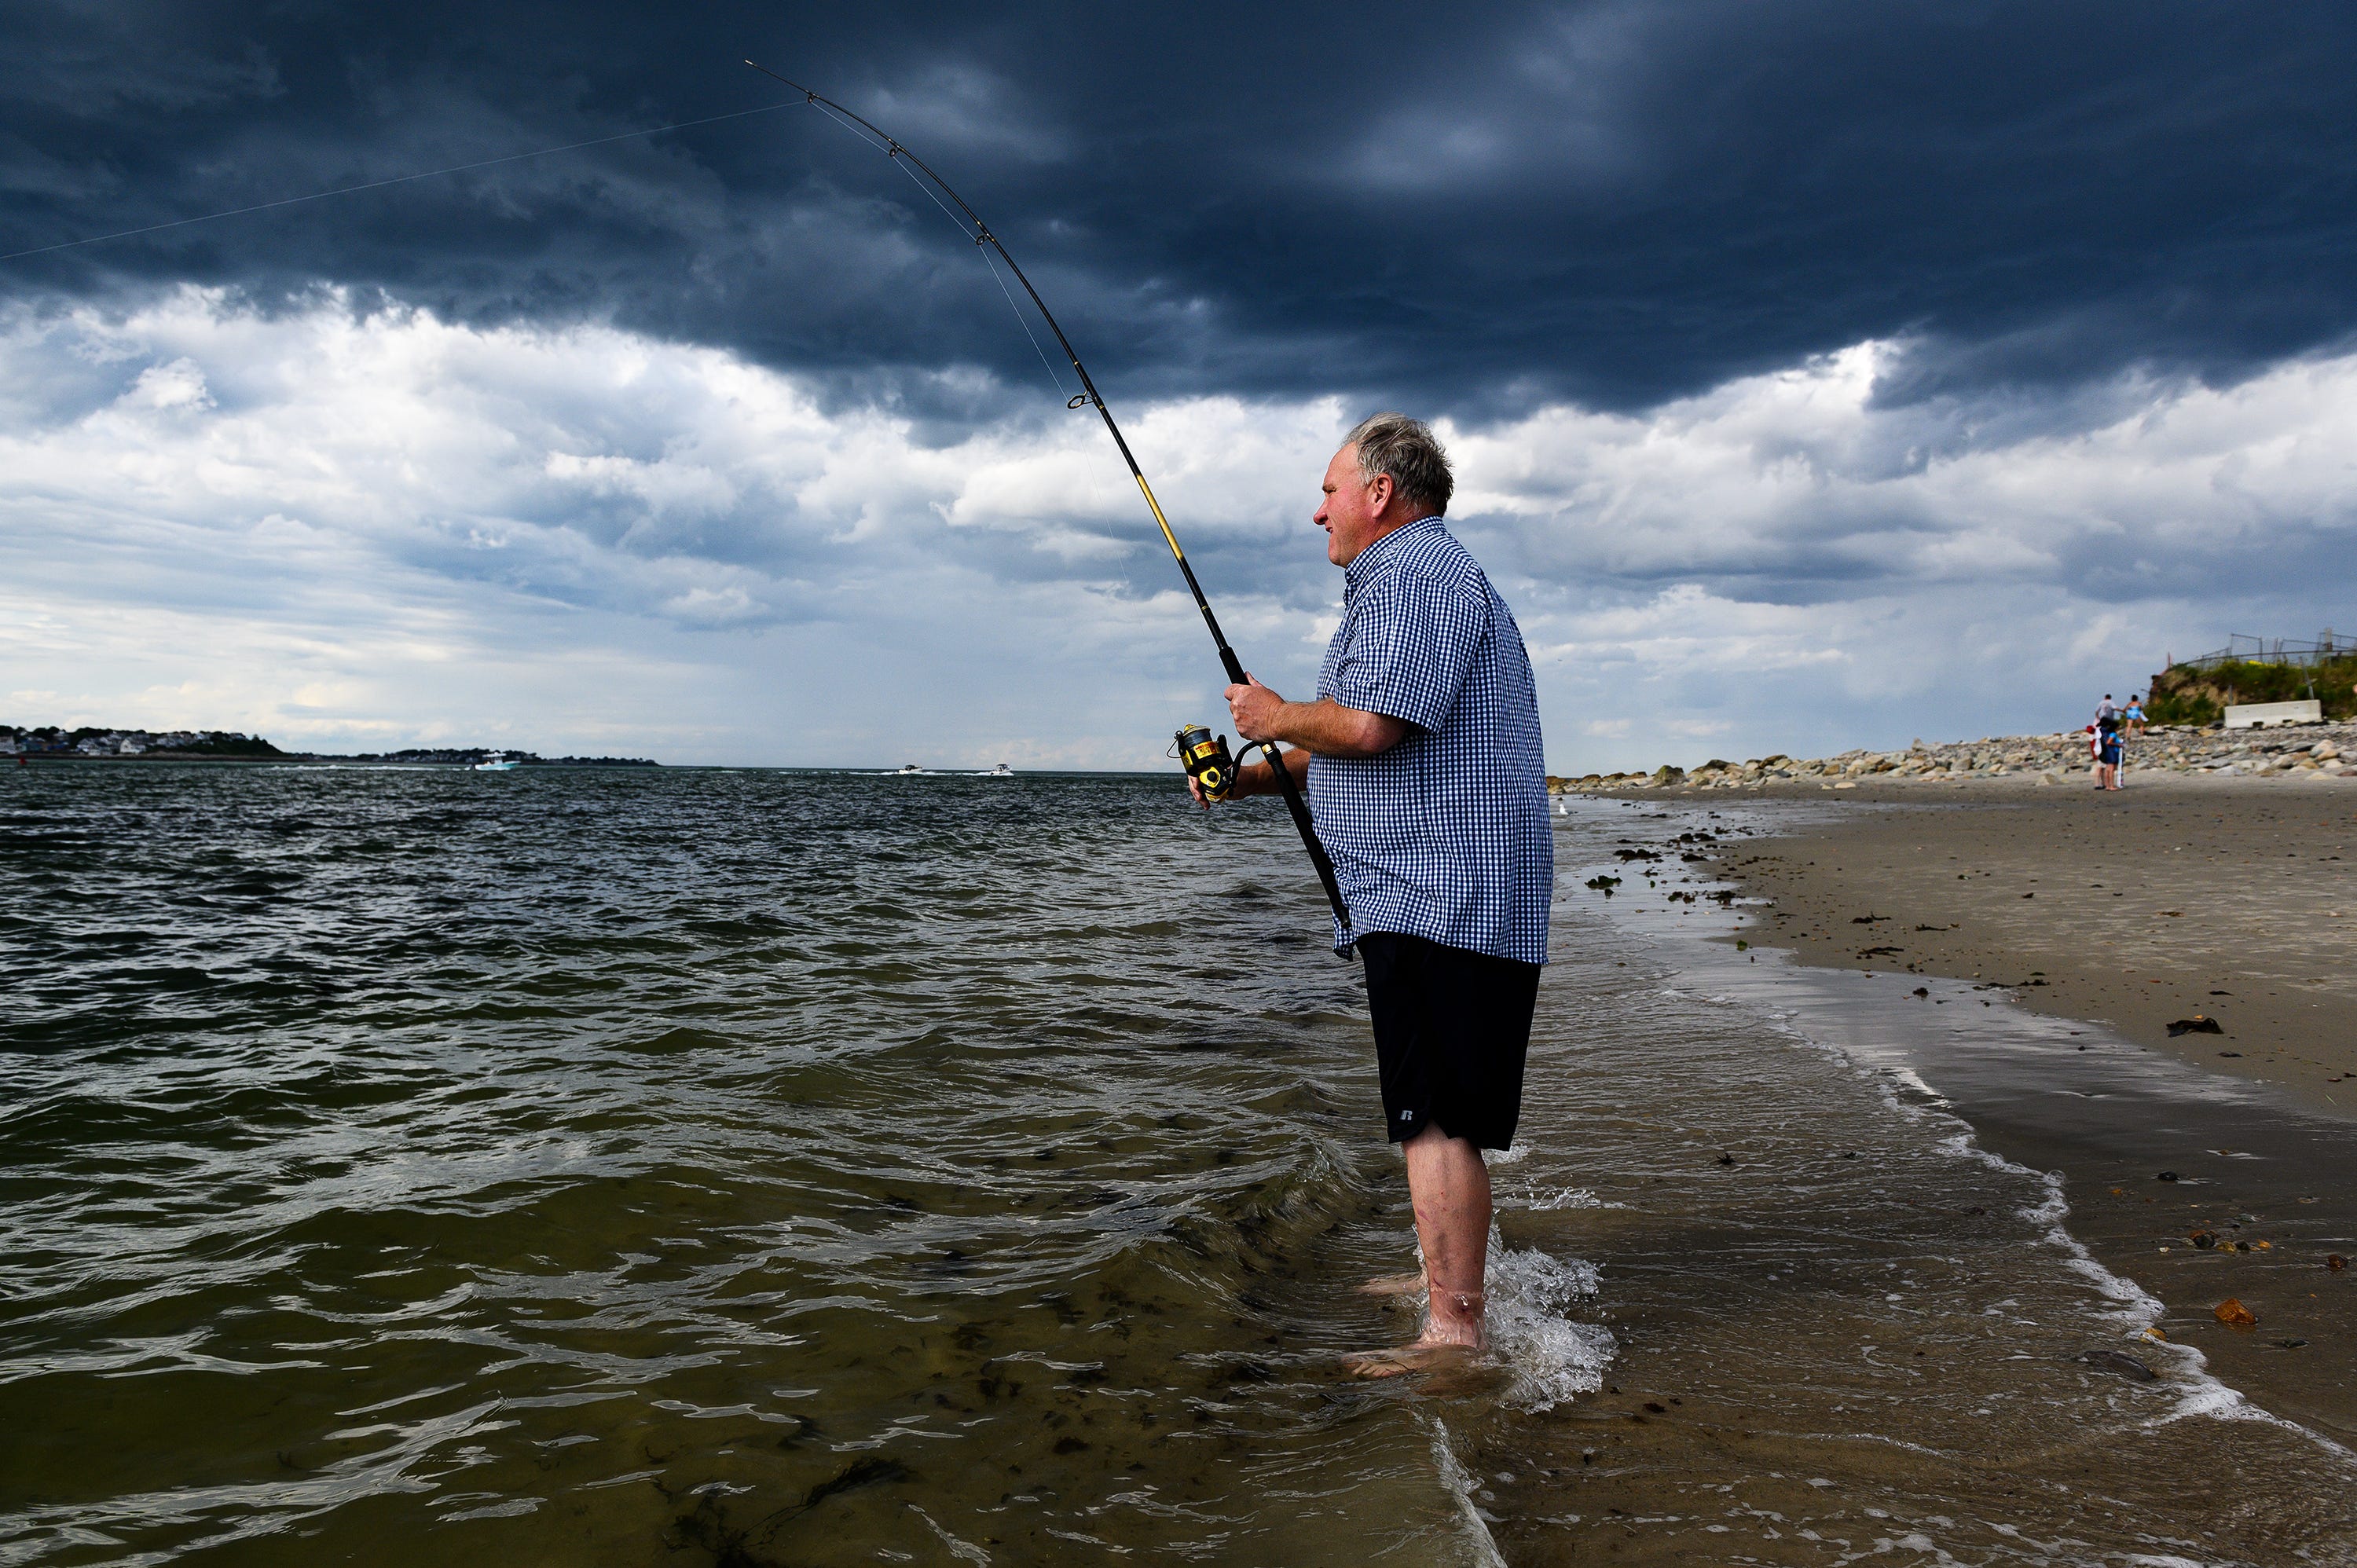 Dan Meehan casts his fishing line into the water on a windy afternoon at the Fourth Cliff Family Recreation Area in August. He says he finds peace in nature.